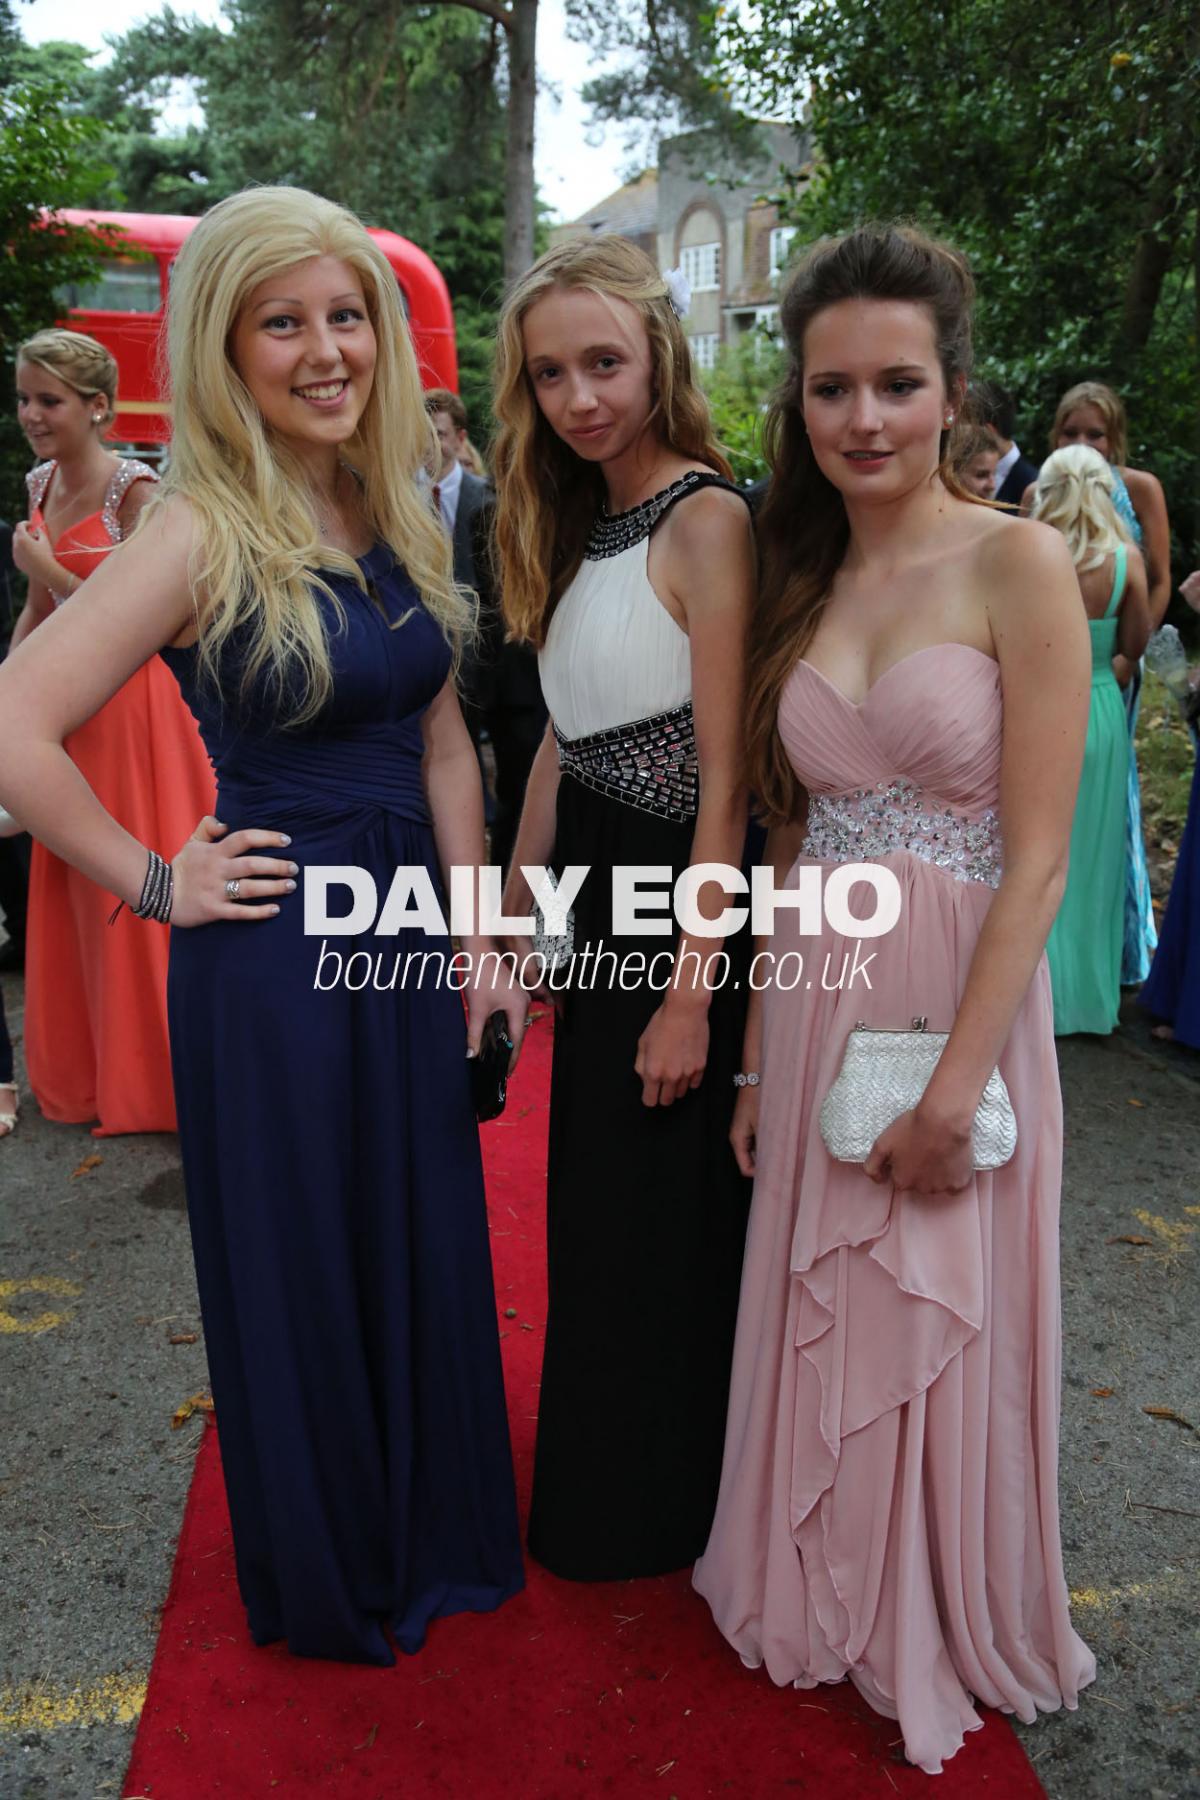 Twynham School Year 11 prom at the Carrington House Hotel in Bournemouth on 4th July 2014